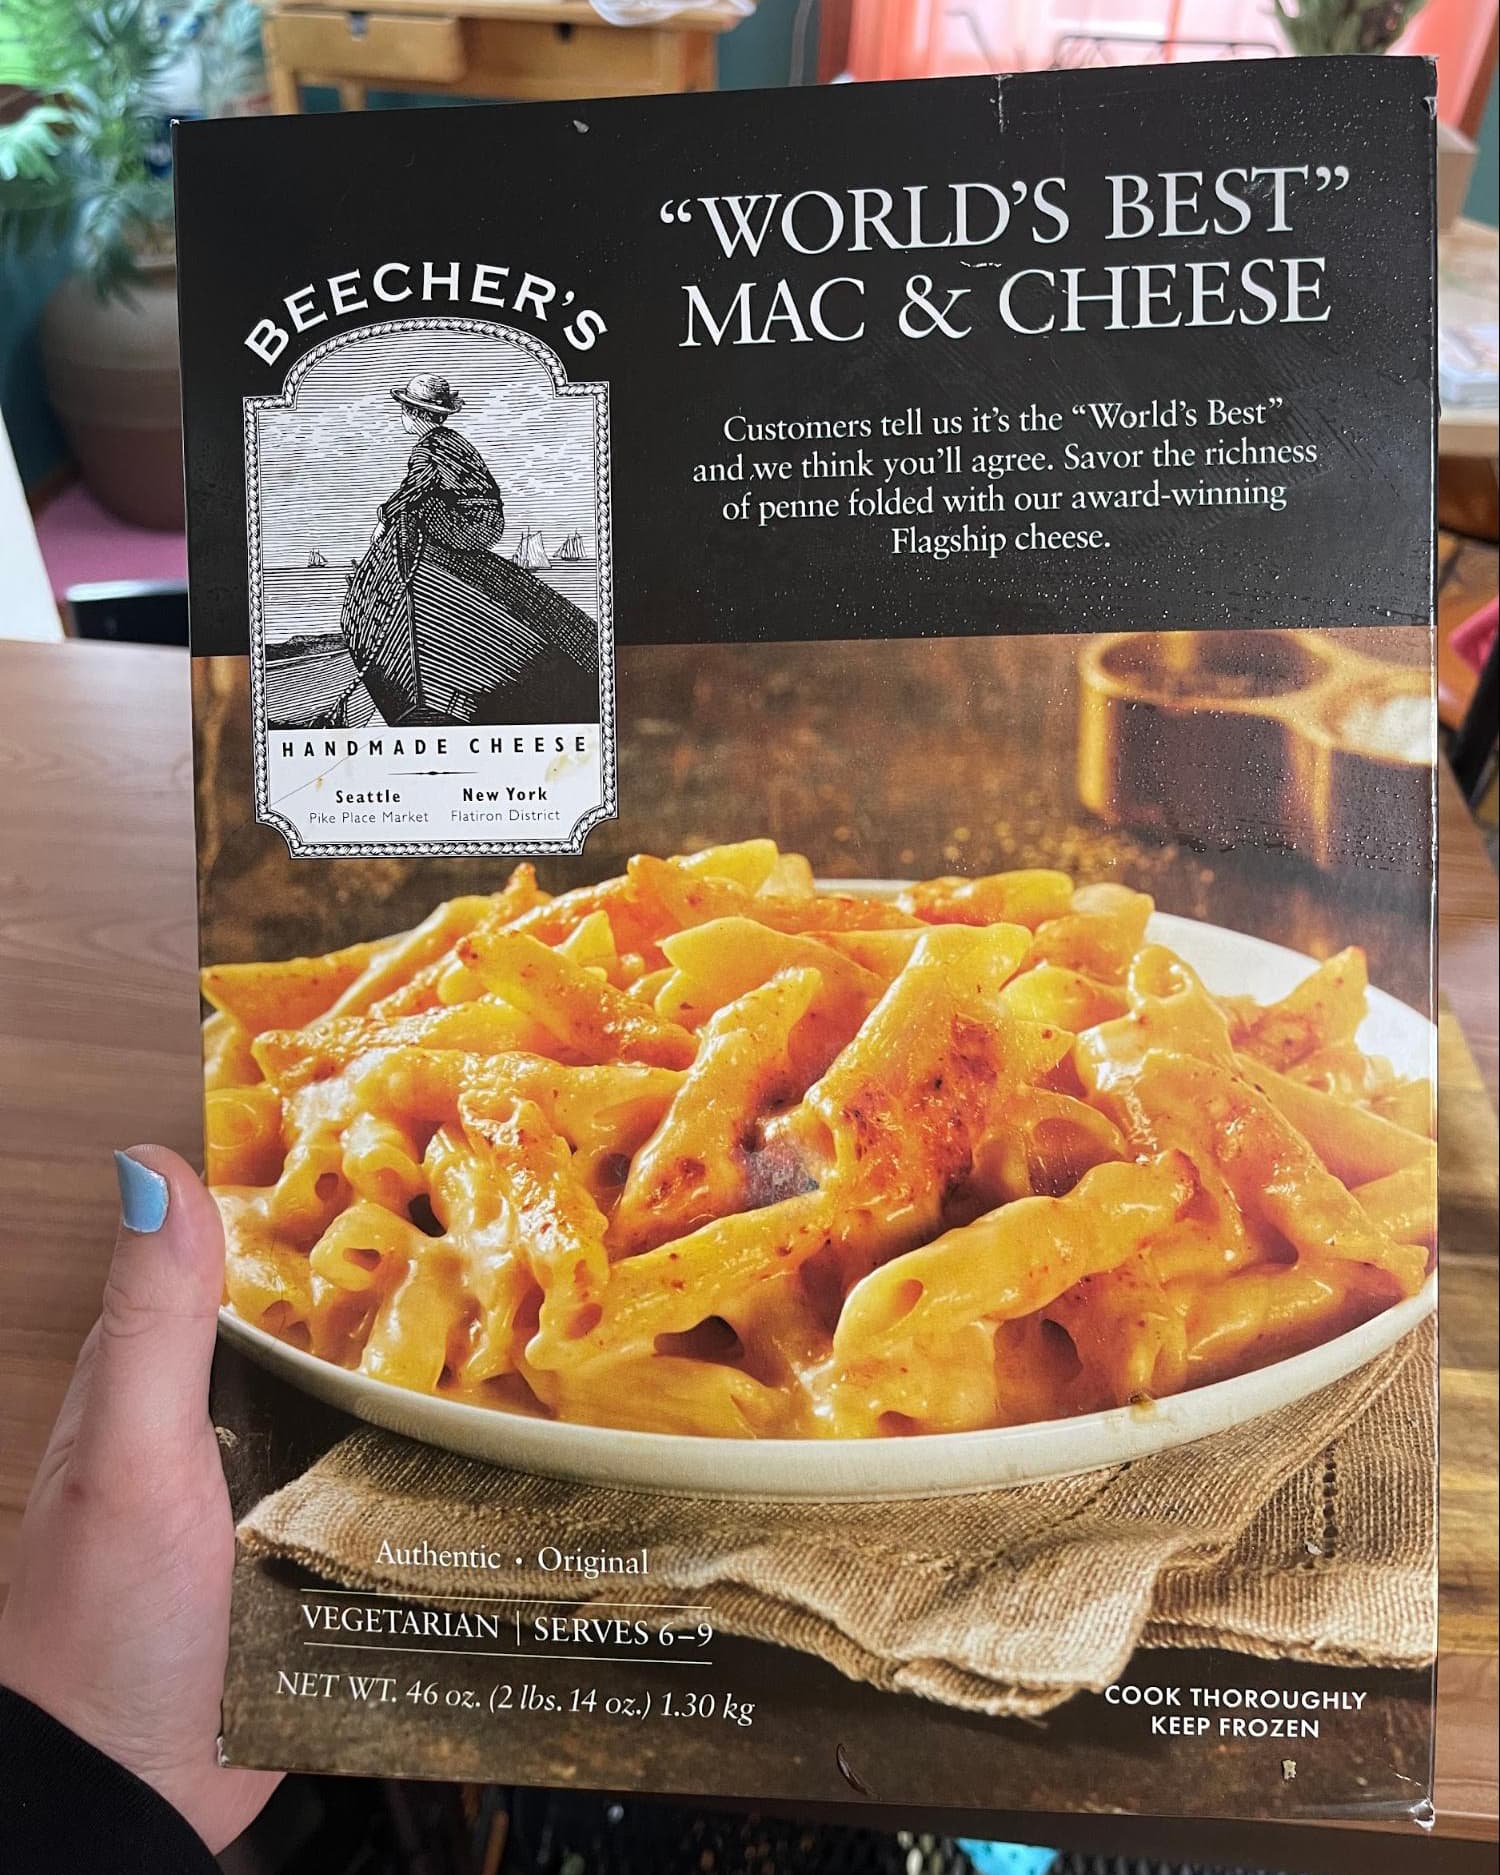 Macaroni & Cheese Frozen Meal